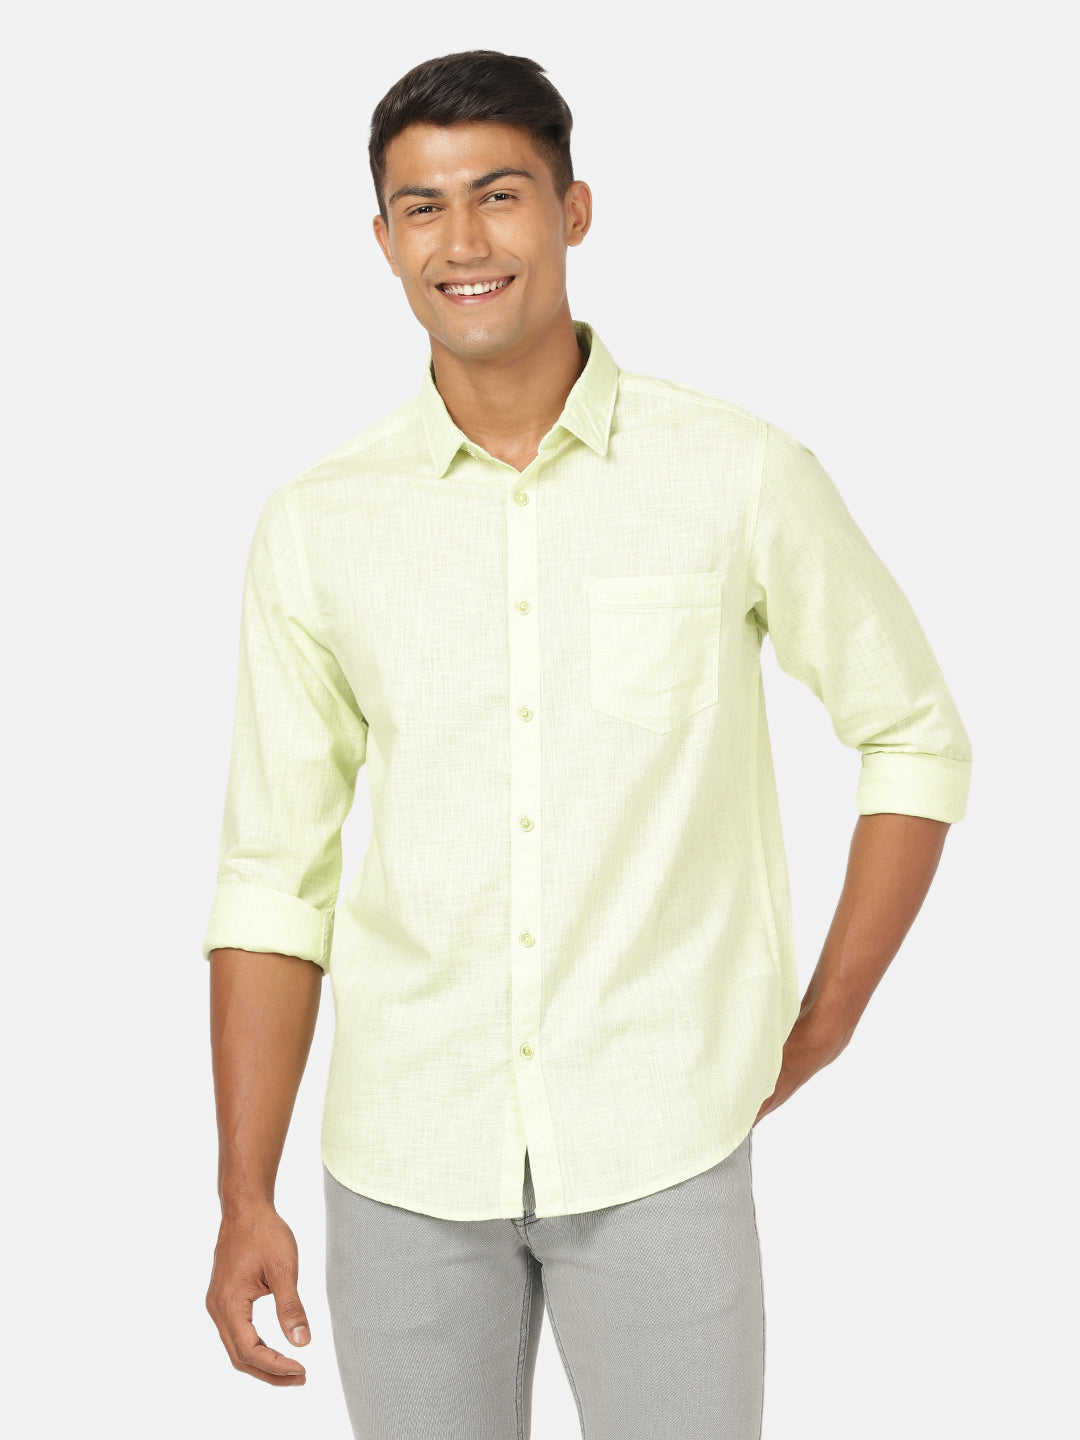 Casual Full Sleeve Comfort Fit Solid Light Green with Collar Shirt for Men